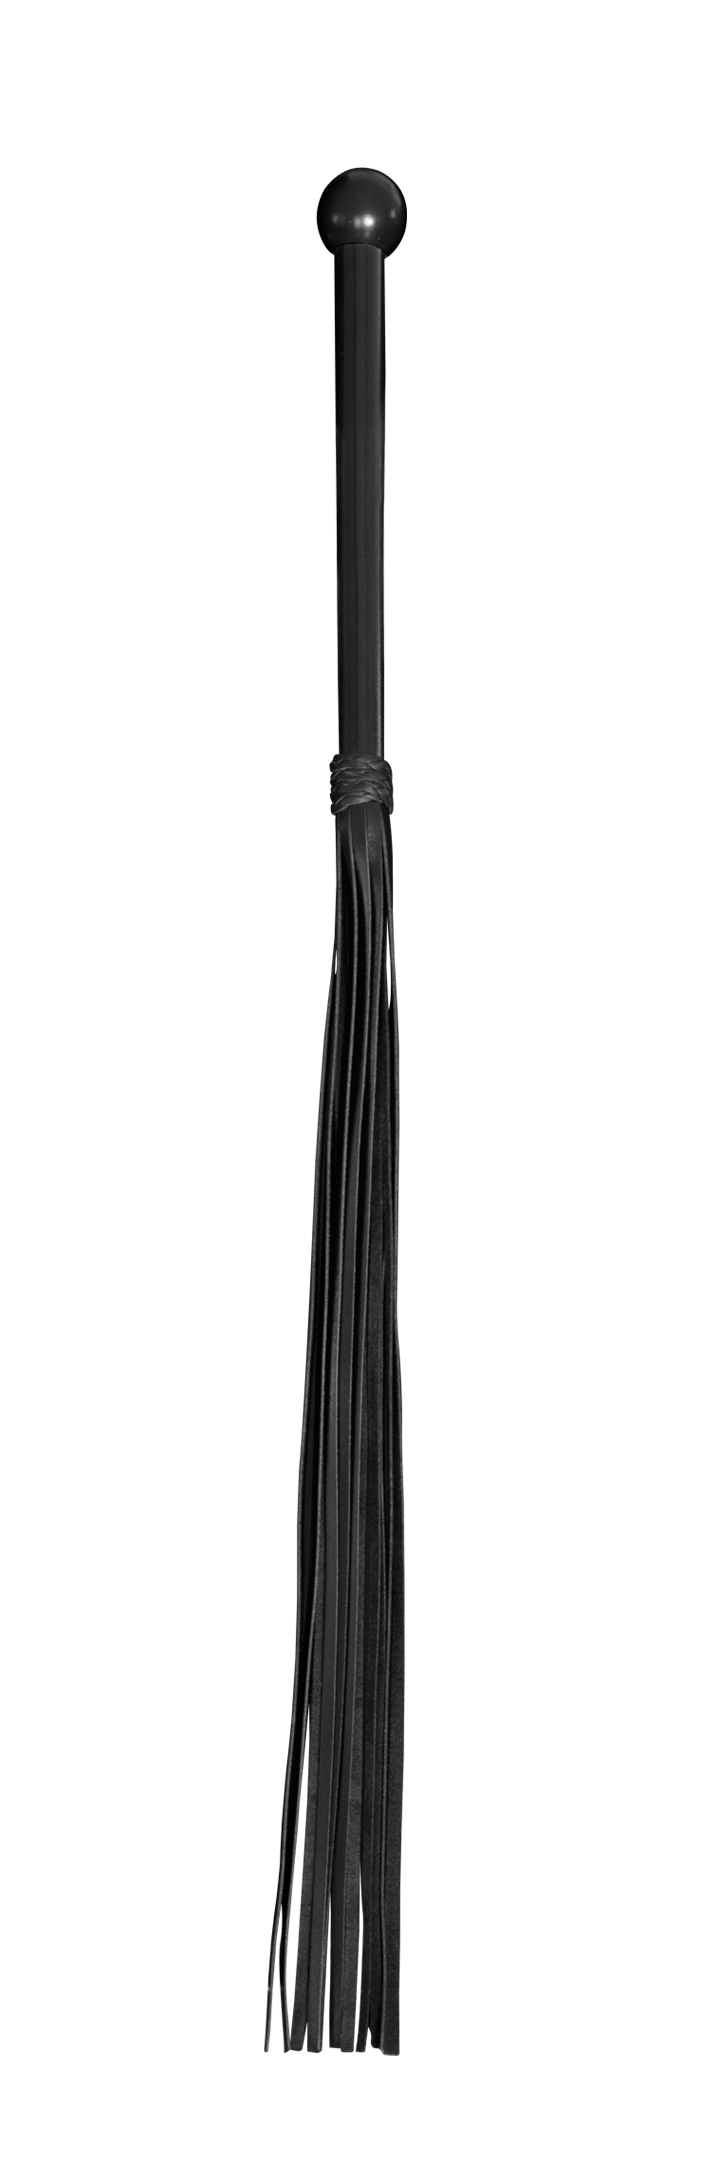 Leather Whip with wooden handle